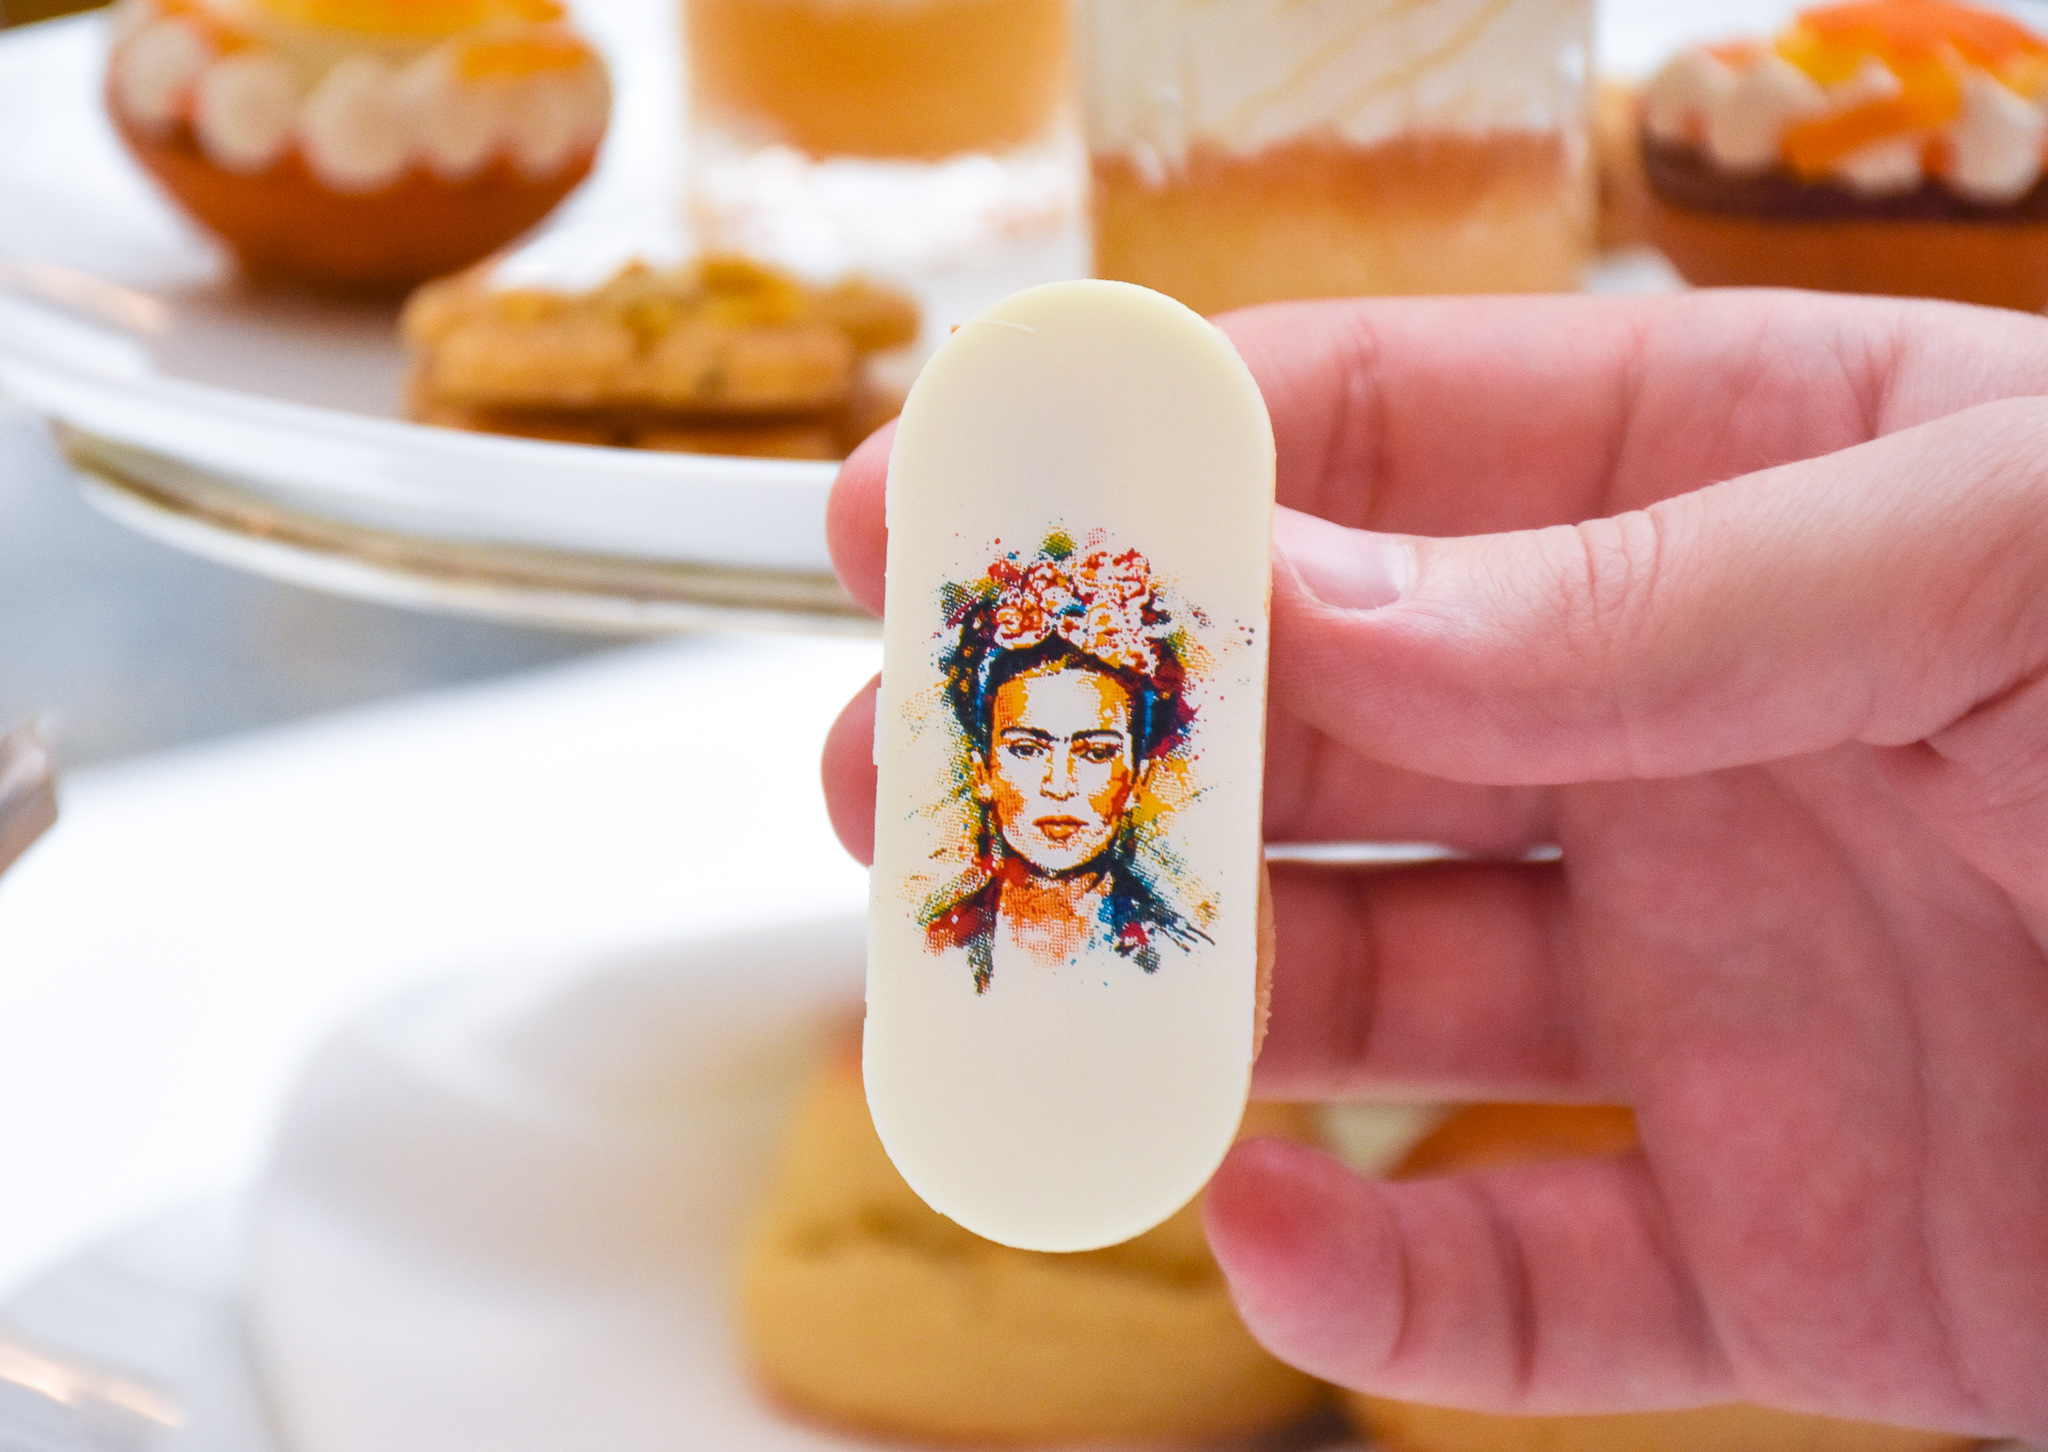 REVIEW: The Frida Kahlo Inspired Afternoon Tea at The Lanesborough